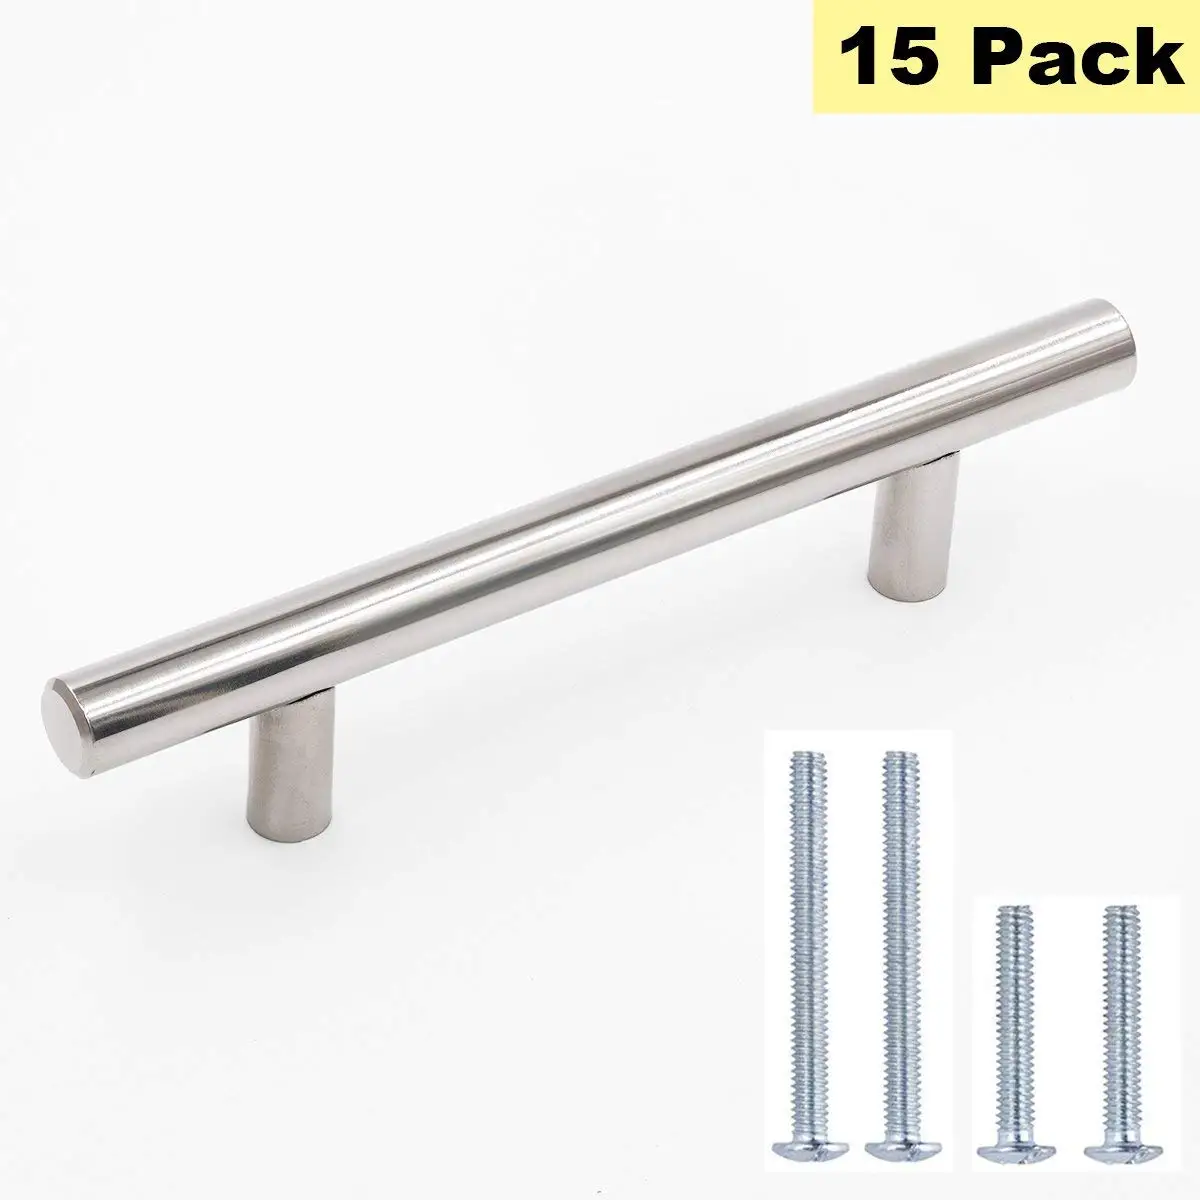 Buy 3 5 Inch Drawer Pulls Kitchen Cabinet Handles Chrome Peaha